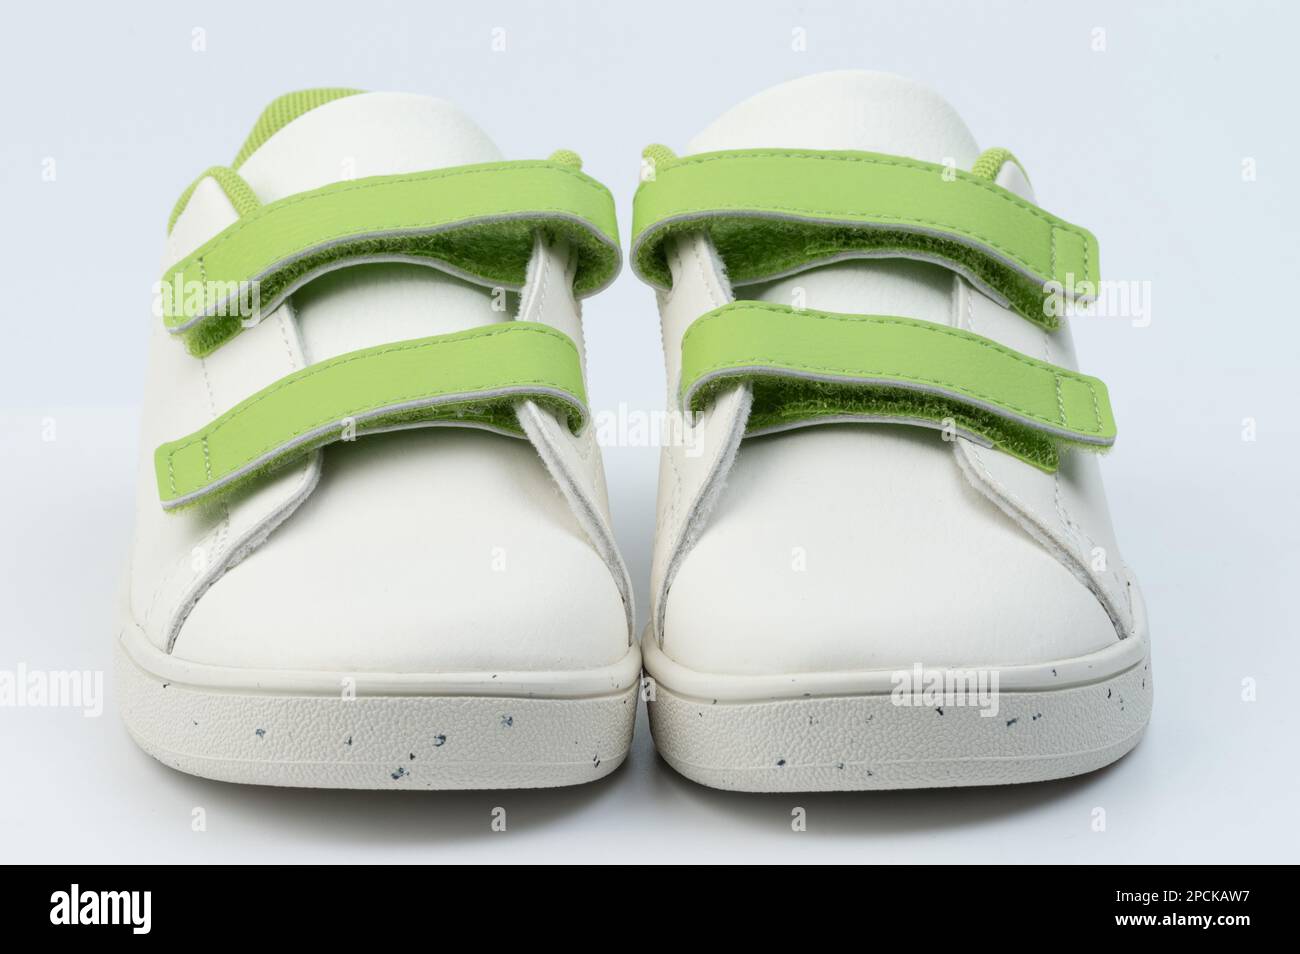 https://c8.alamy.com/comp/2PCKAW7/pair-of-white-child-shoes-with-velcro-front-view-isolated-on-studio-background-2PCKAW7.jpg